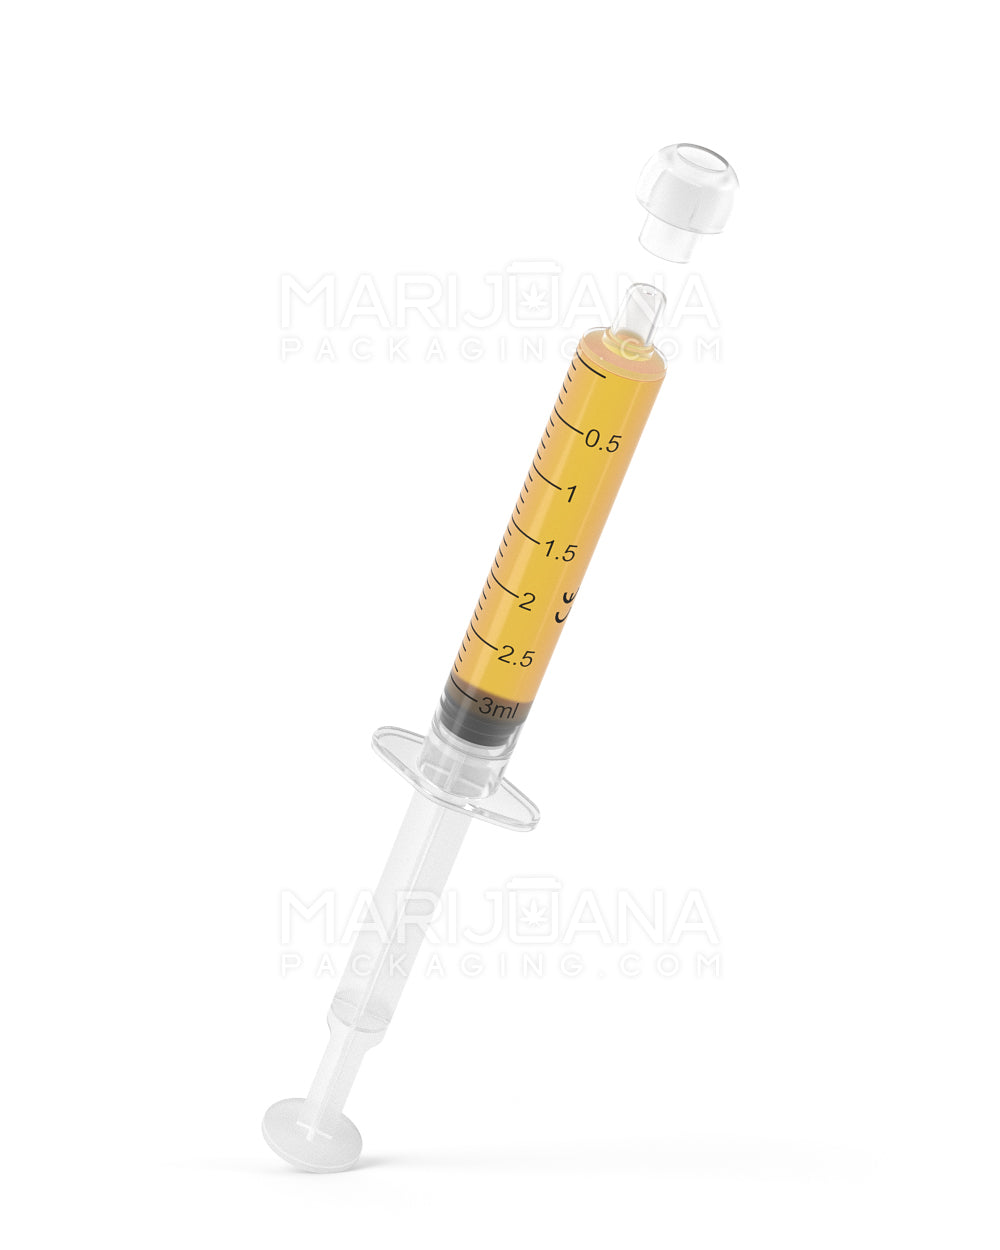 Plastic Oral Concentrate Syringes | 3mL - 0.5mL Increments | Sample - 6